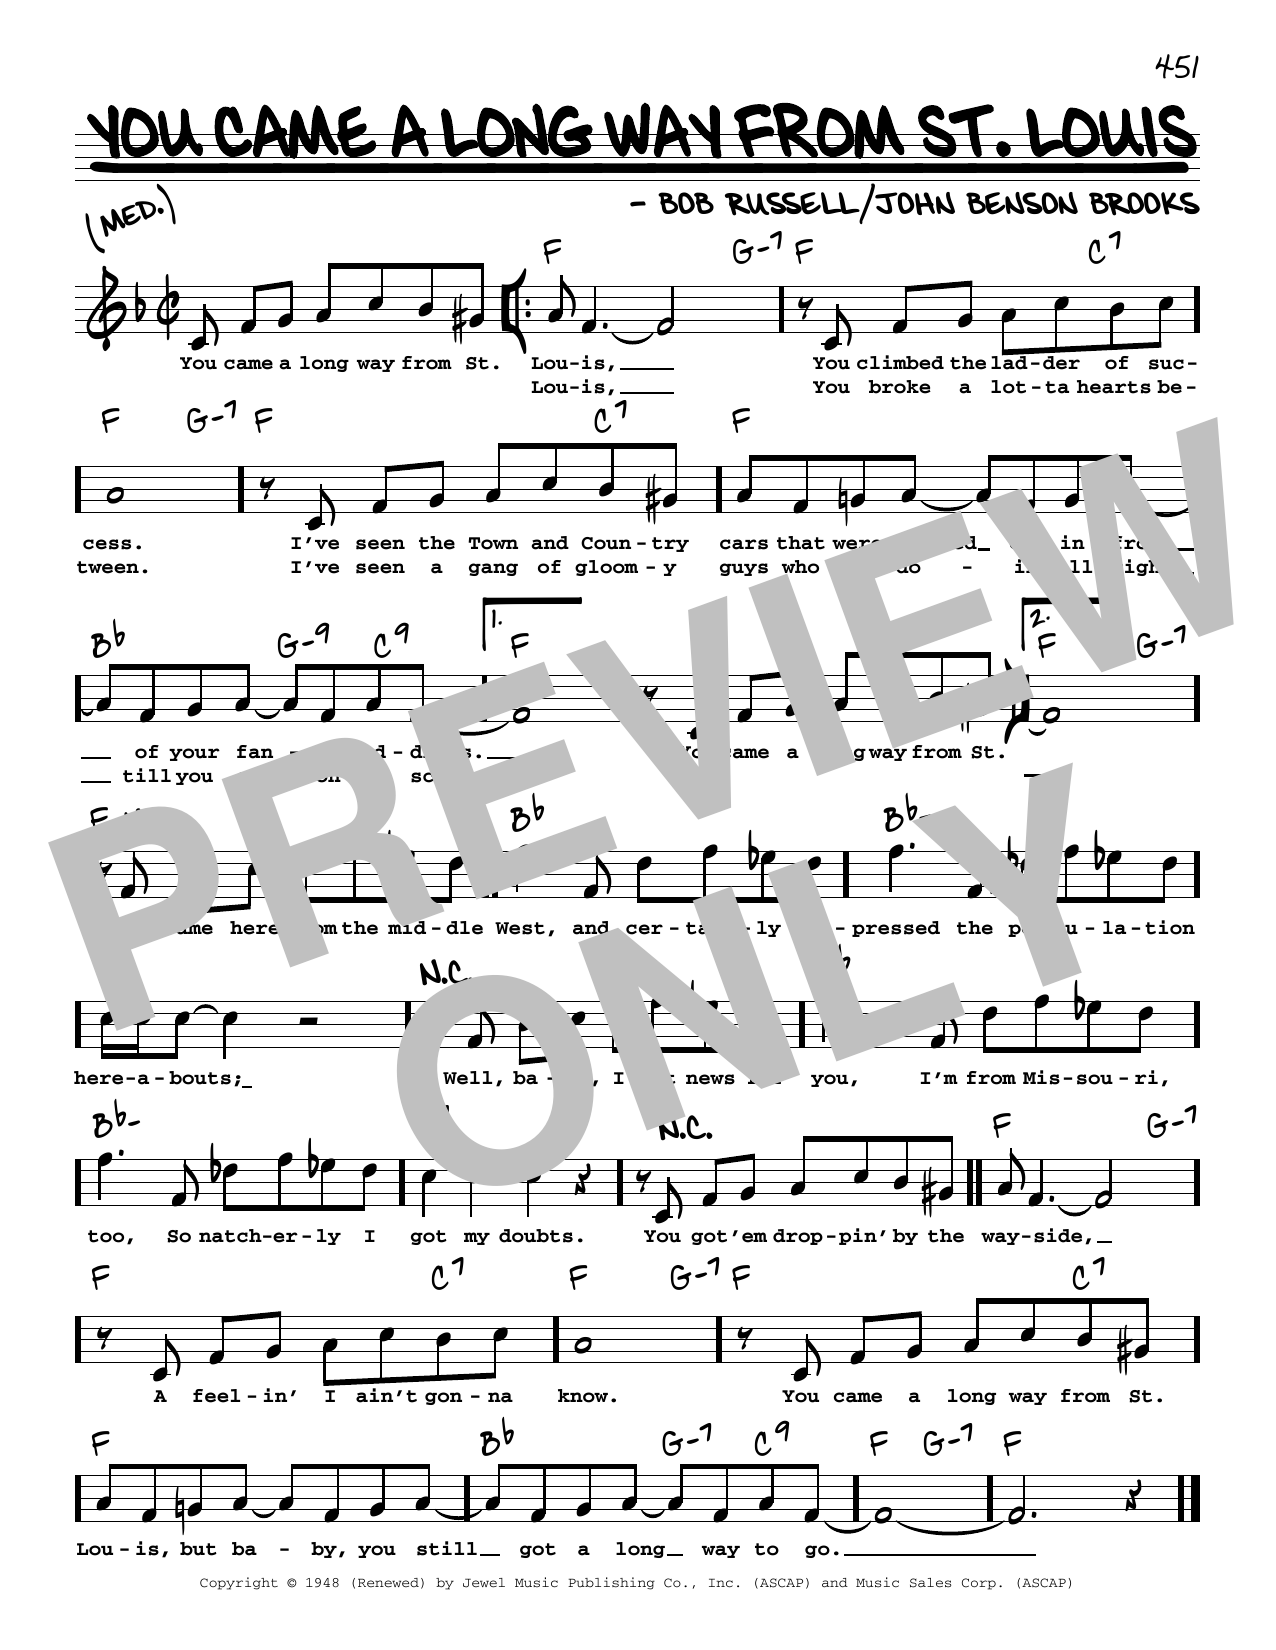 Download Bob Russell You Came A Long Way From St. Louis (Hig Sheet Music